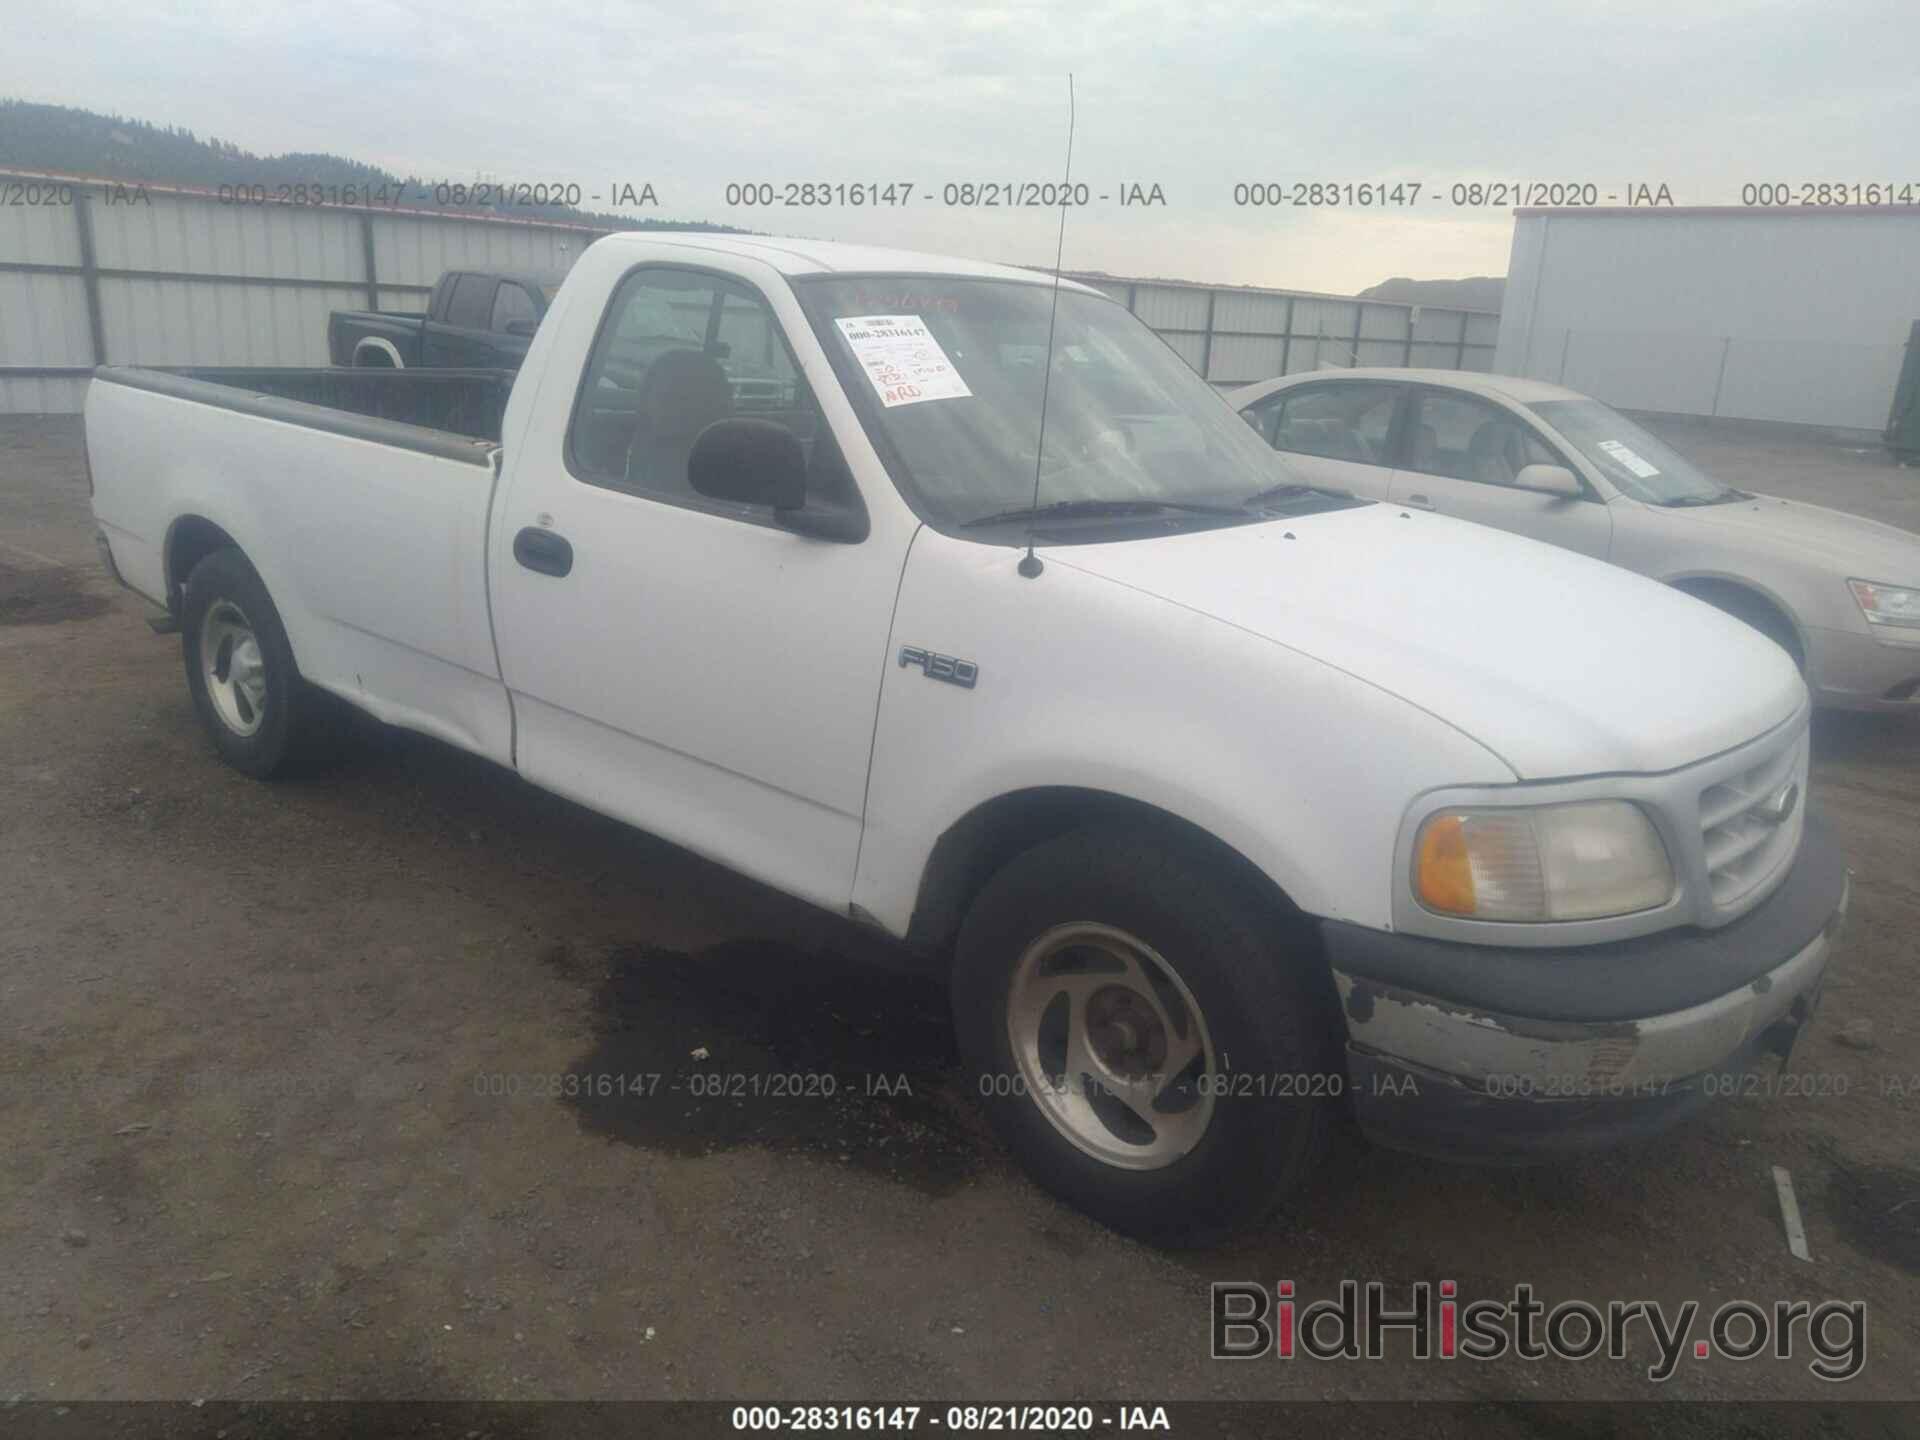 Photo 2FTZF1726XCA83763 - FORD F-150 1999